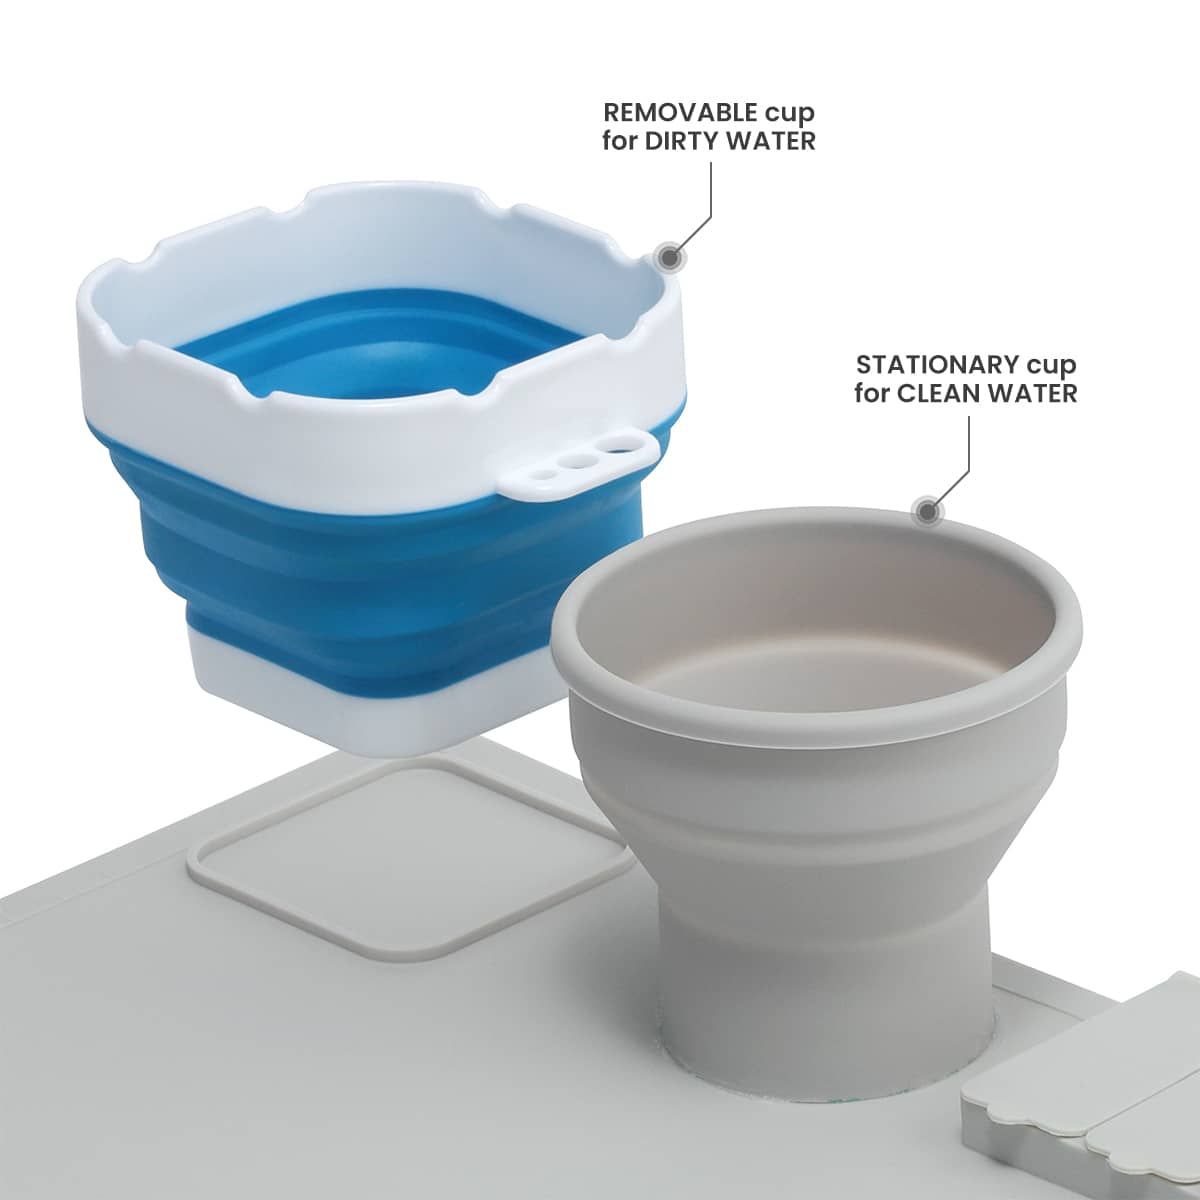 Two collapsible water cups - one fixed and one removable